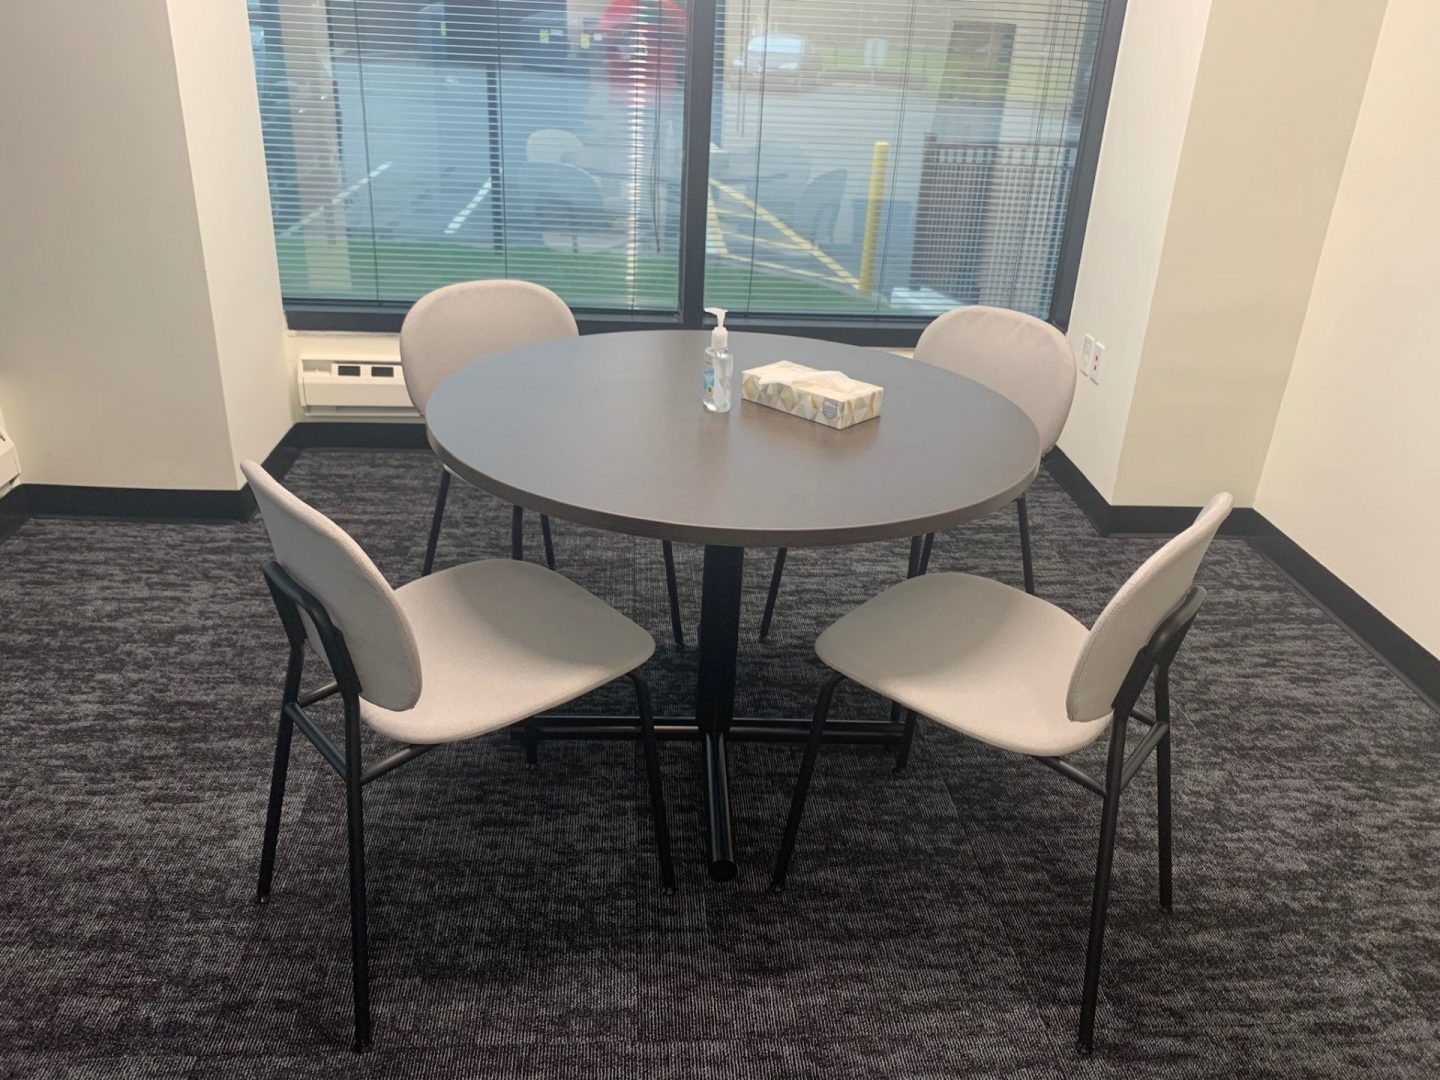 A round table with white chairs